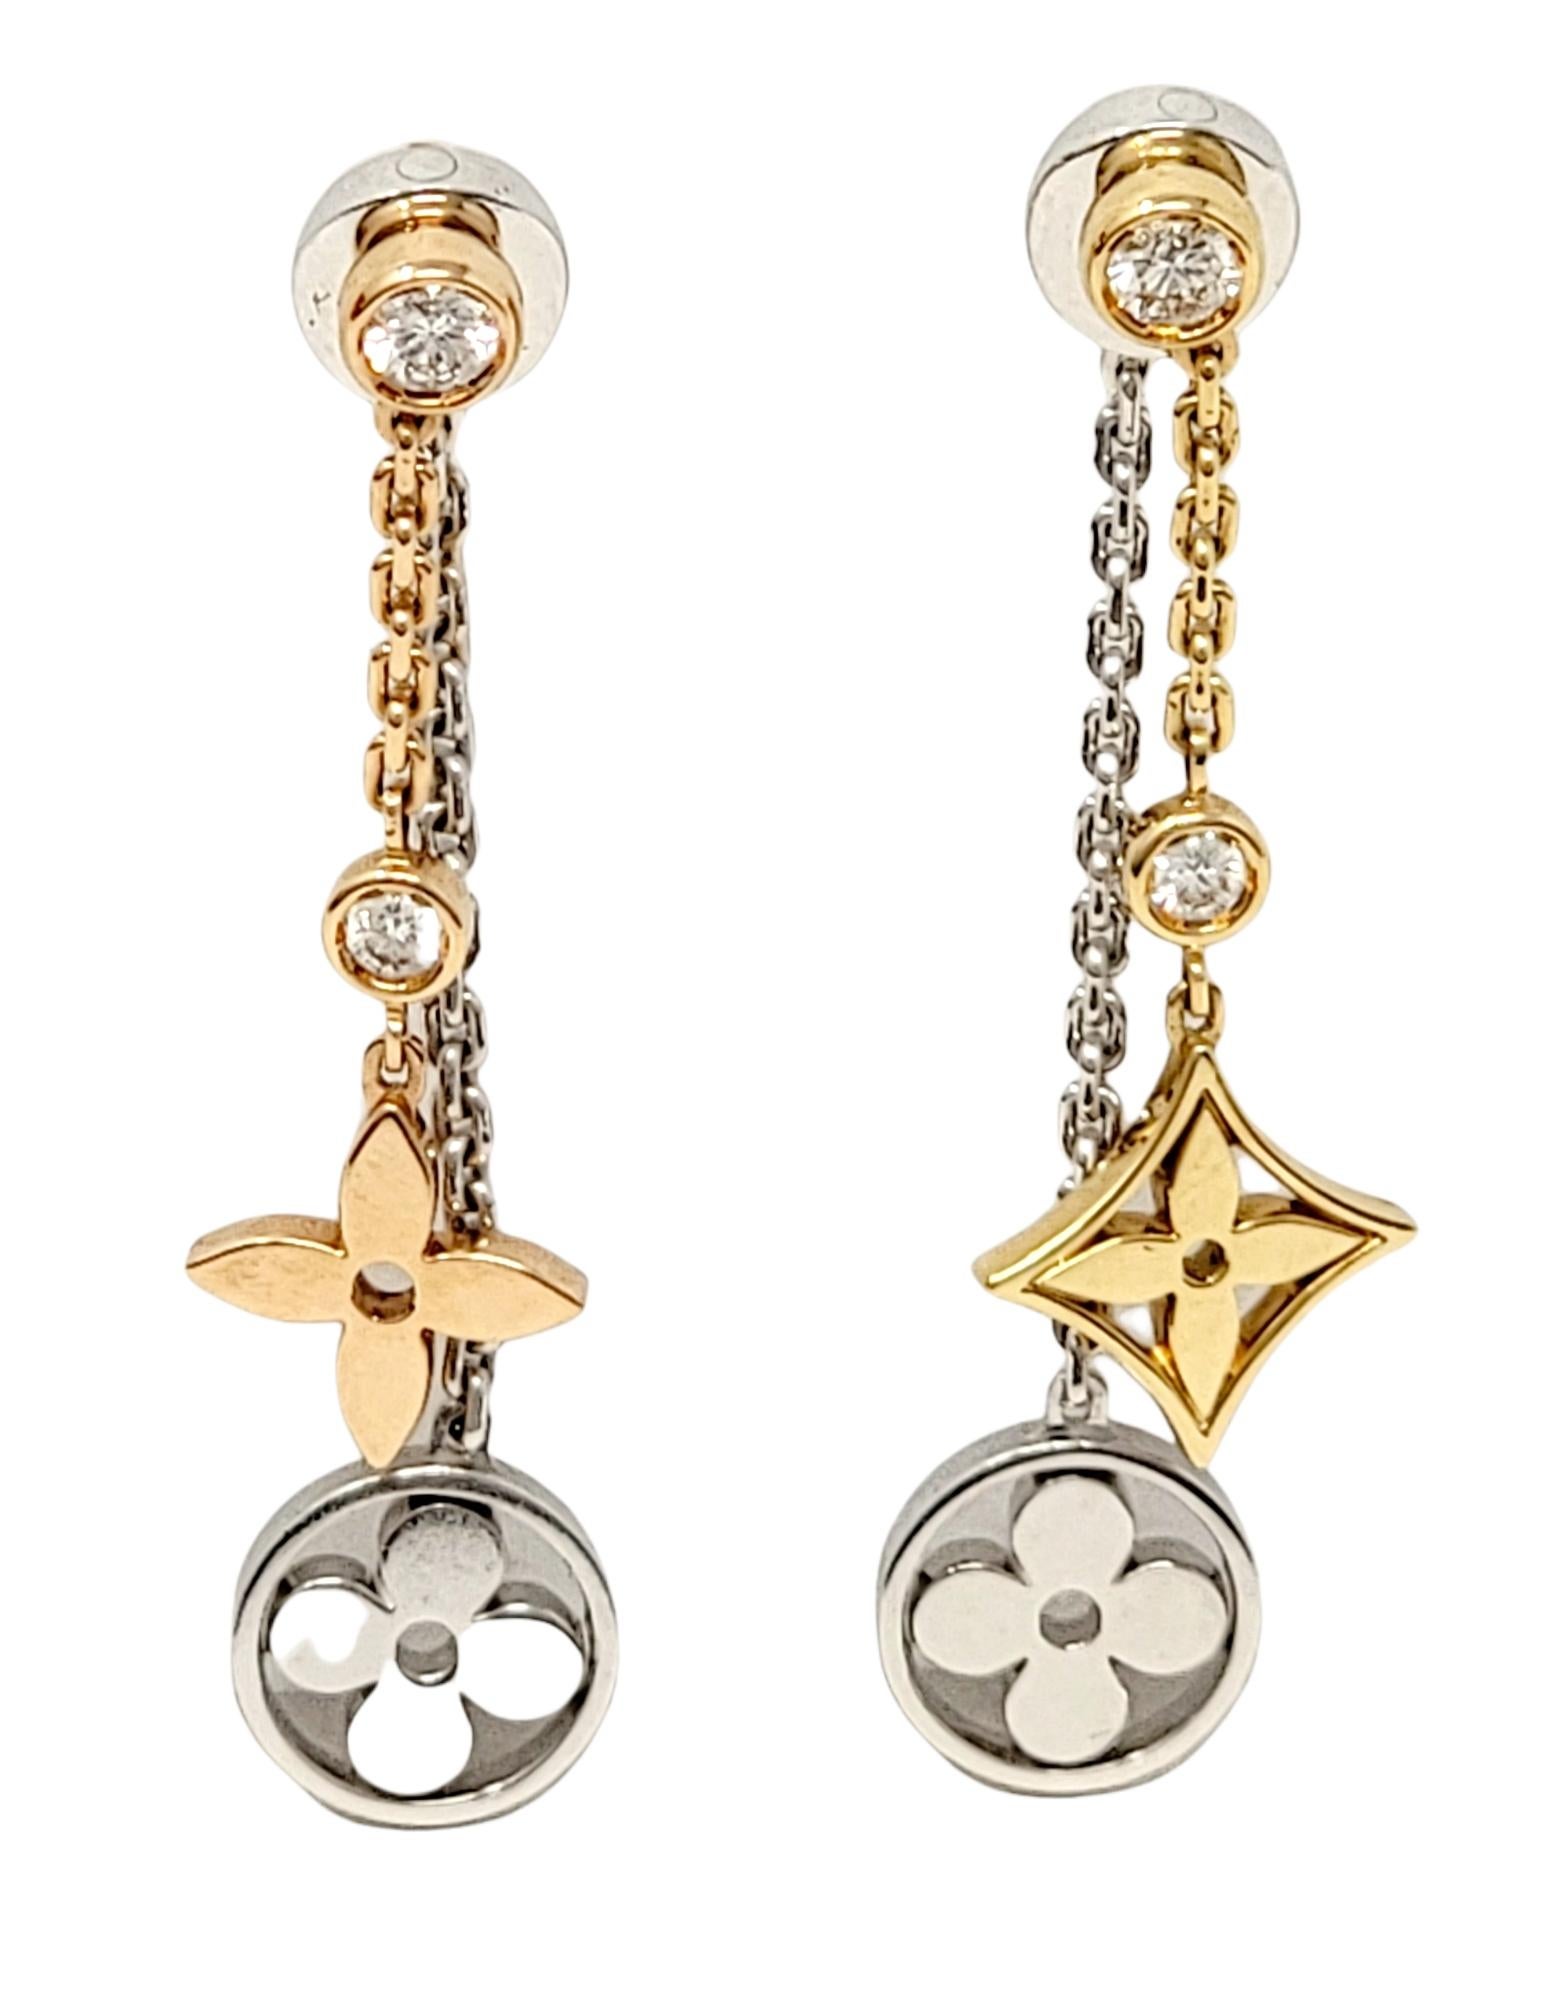 Chic and playful dangle earrings by renowned designer, Louis Vuitton. With their multi-tone gold design, paired with sparkling natural diamonds and the signature Louis Vuitton monogram detail, these gorgeous earrings will not go unnoticed. The